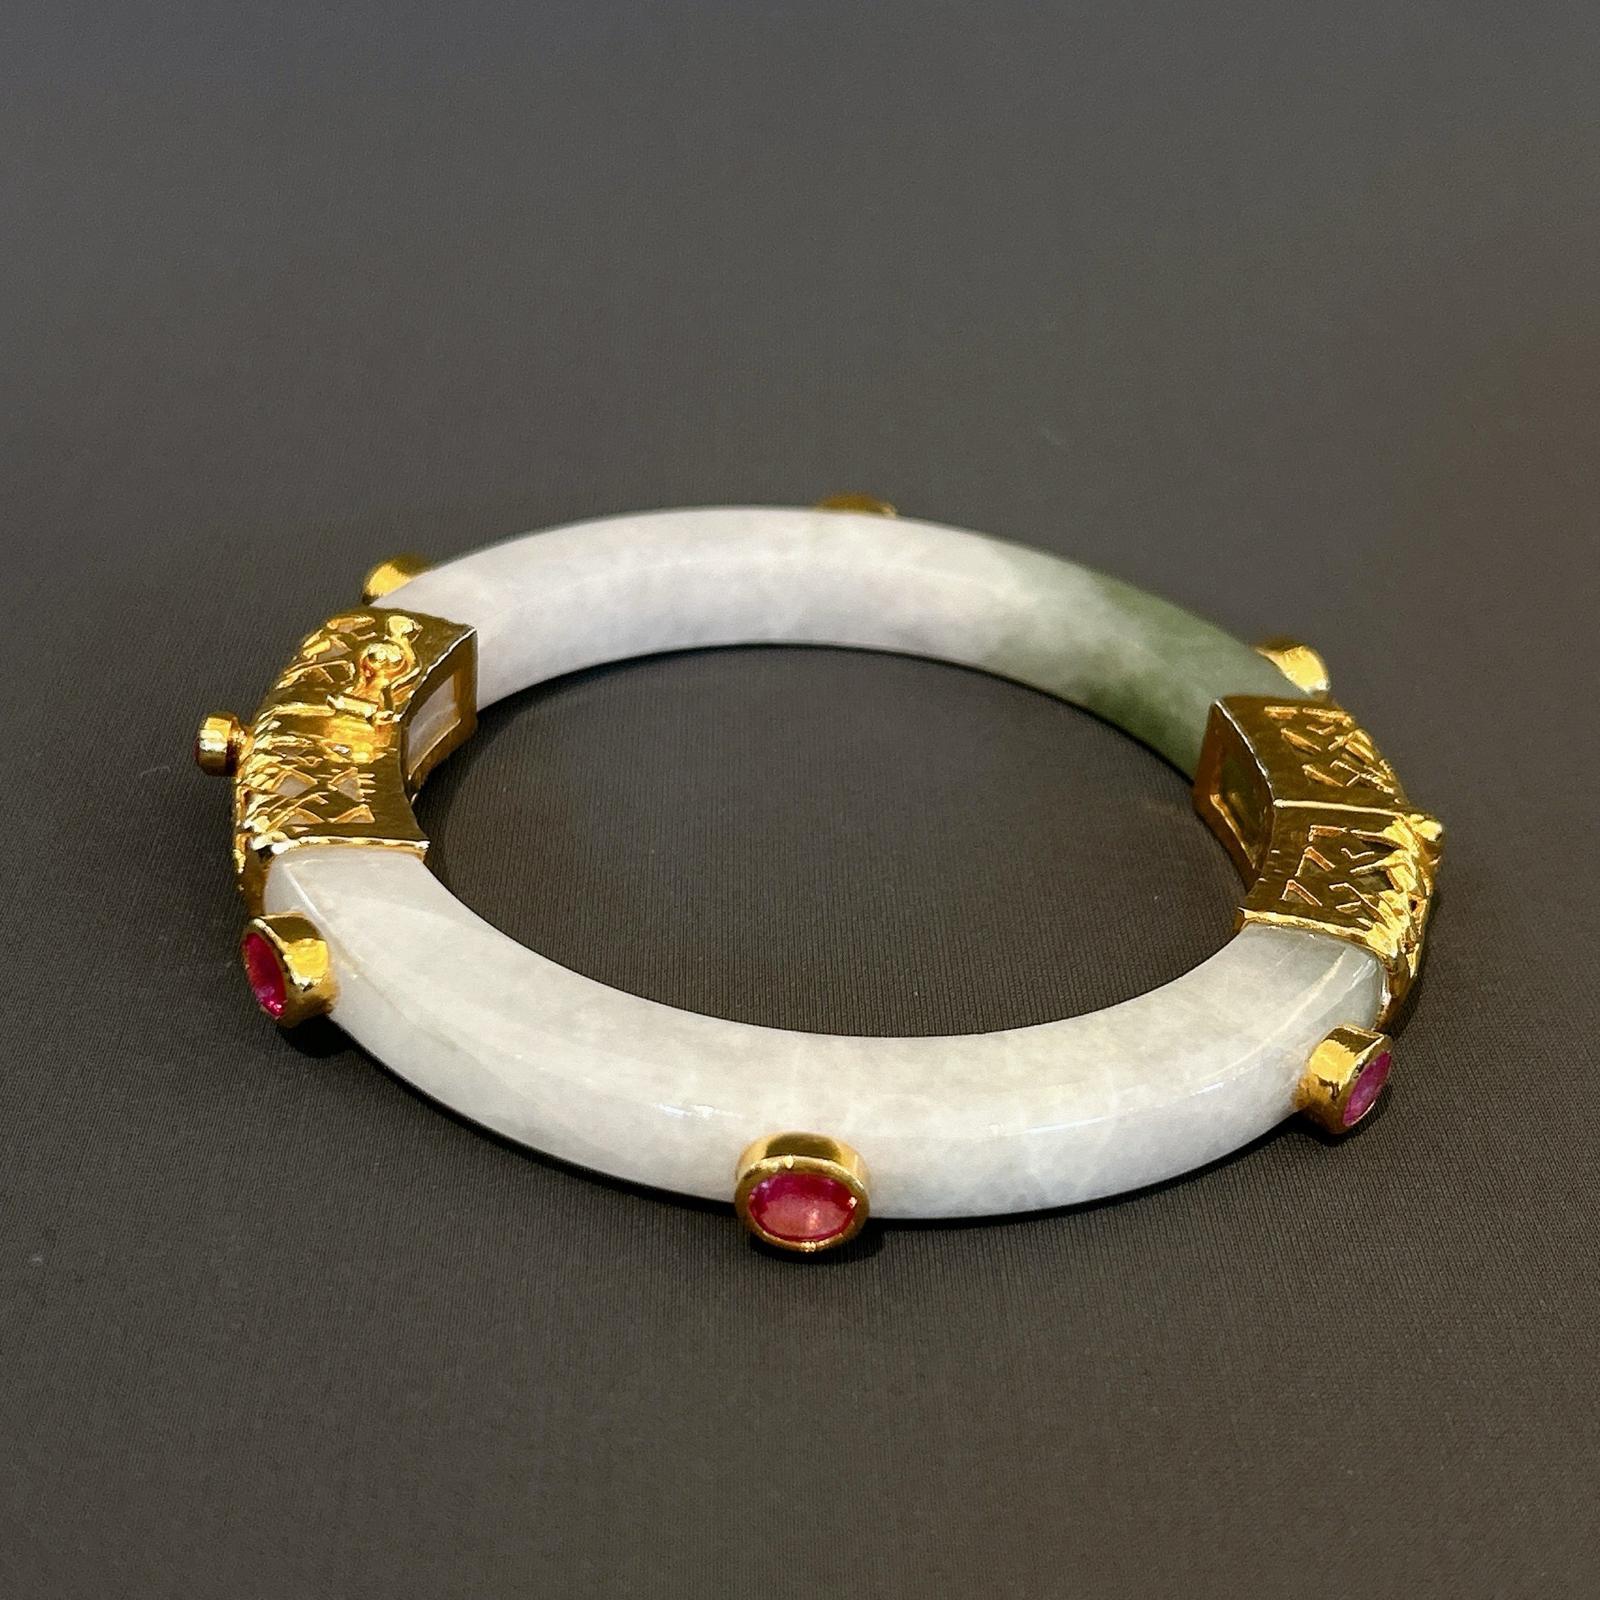 Bochic “Orient” Ruby & Vintage Jade Bangle Set In 18K Gold & Silver 

Natural red rubies - 4 Carats 
Vintage Mint Green Jade 

The bangle has an open and close hinge 

This bangle is from the 